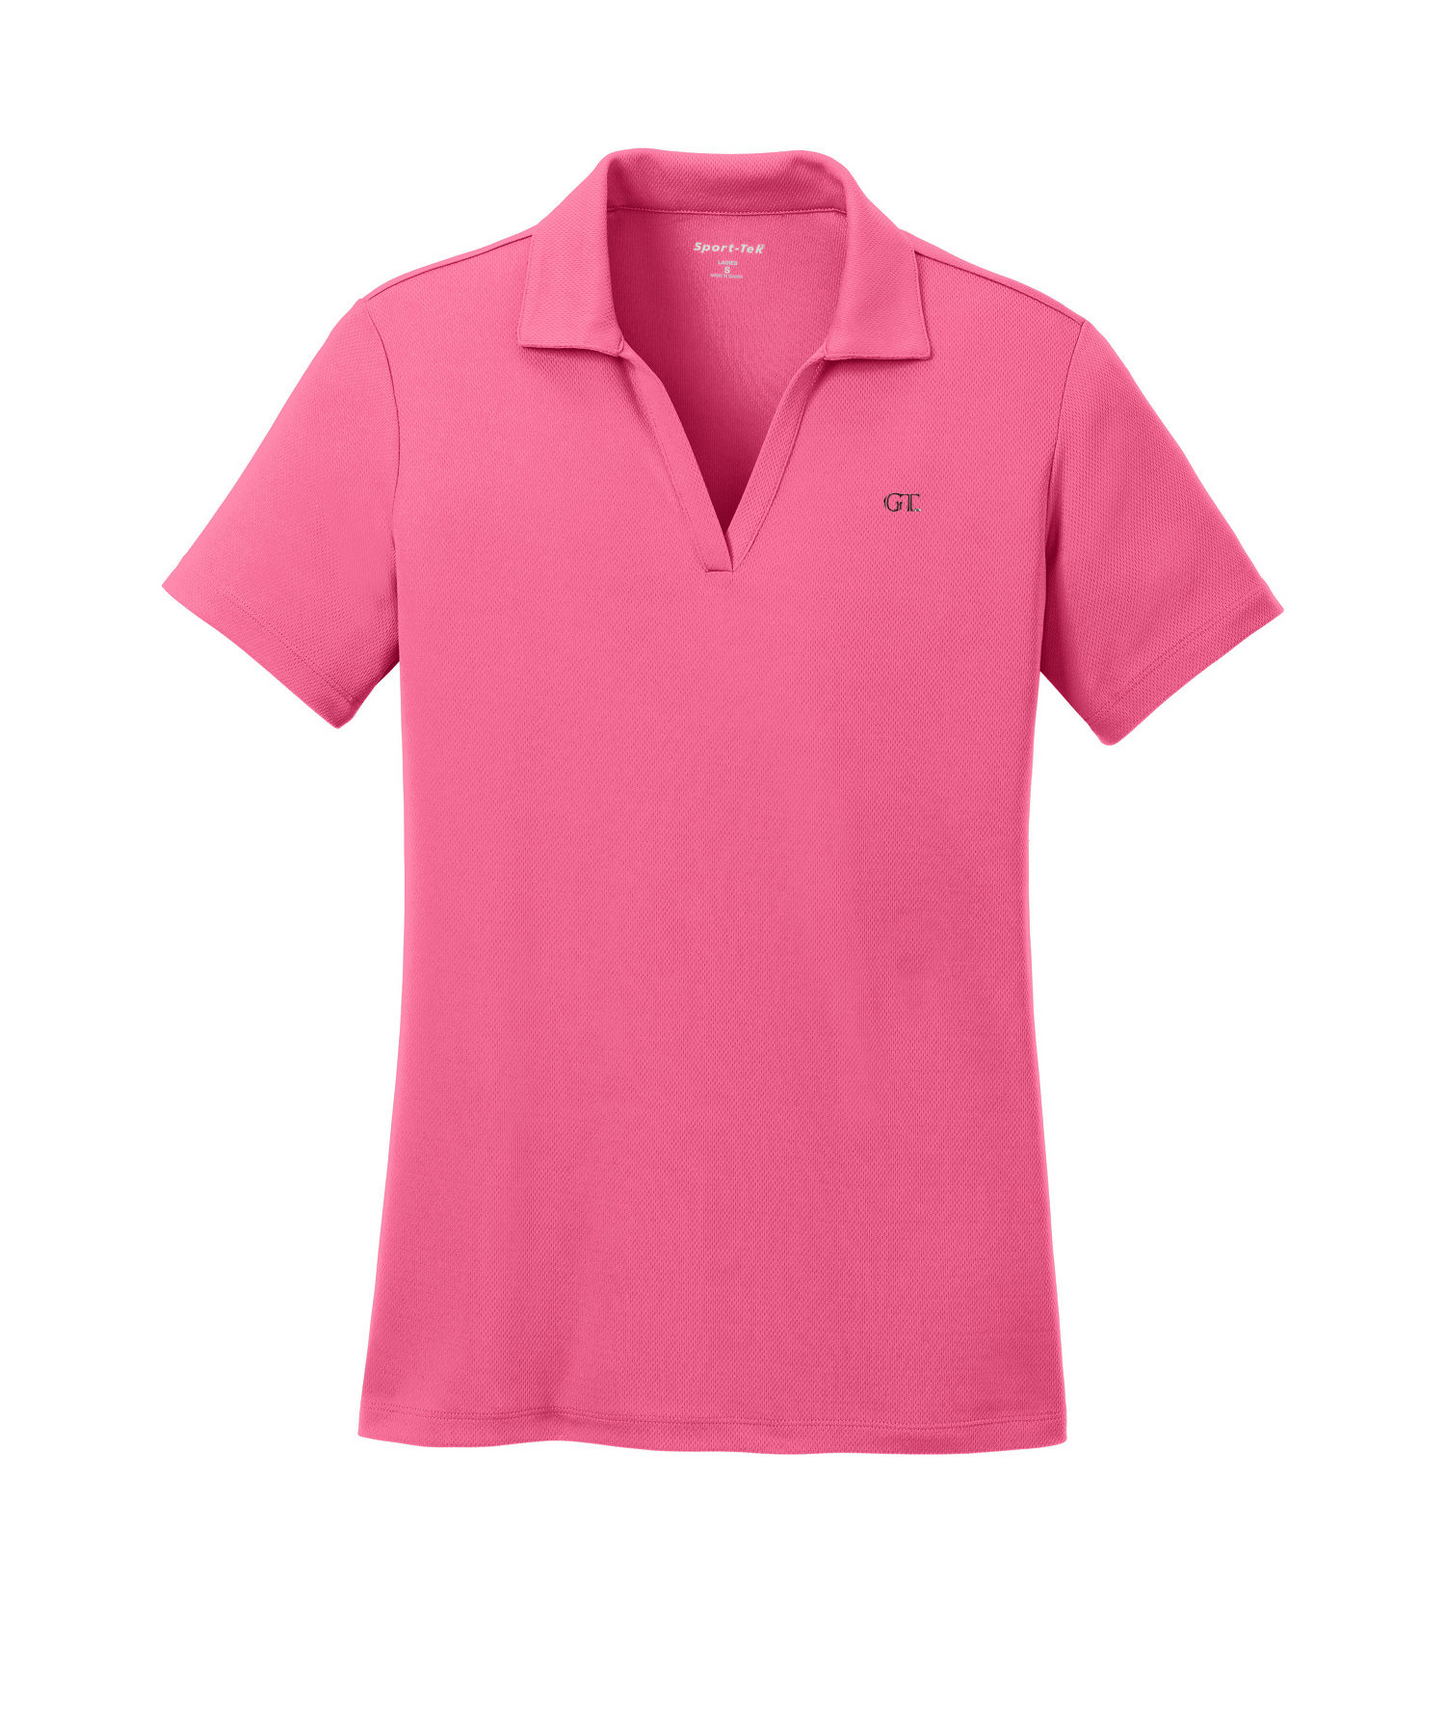 GT Sport Embroidered Women's Wicking Polo